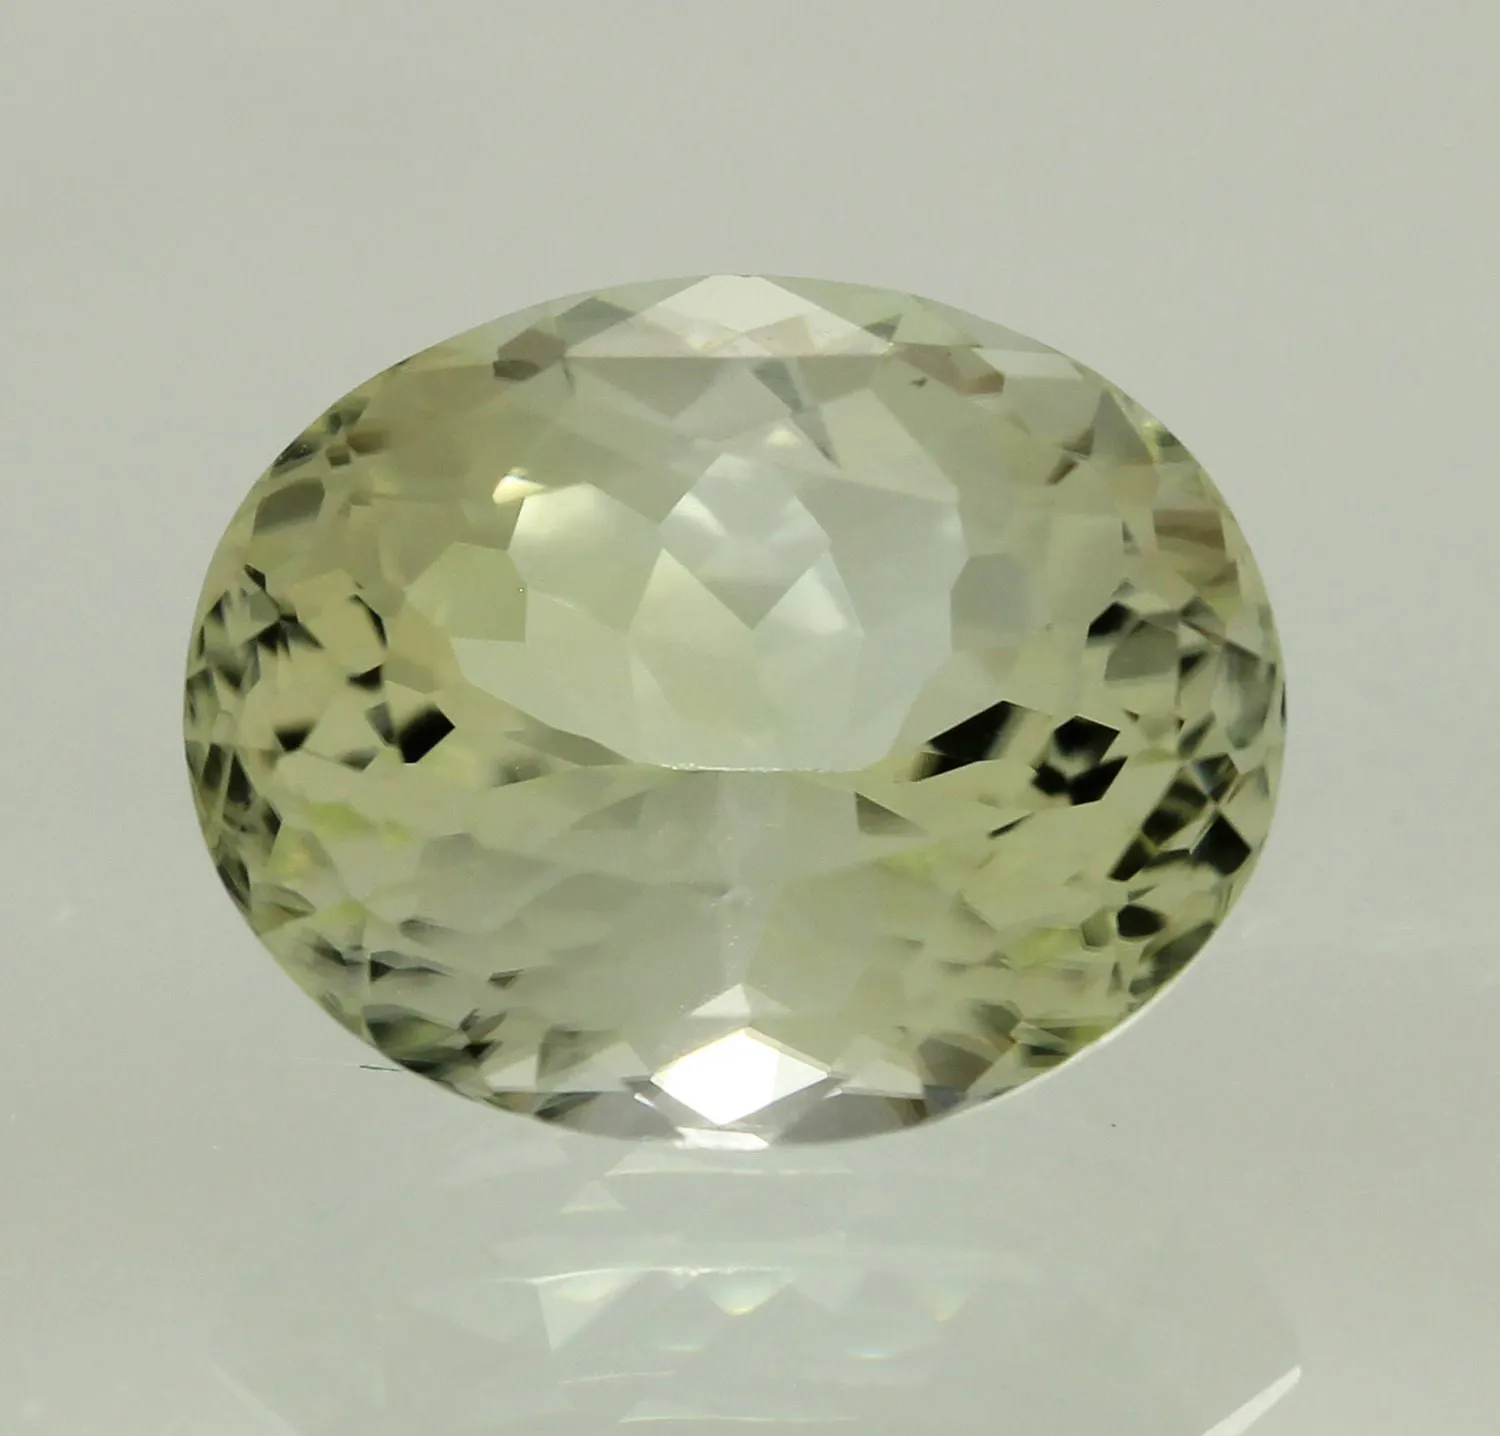 Datolite Value, Price, and Jewelry Information